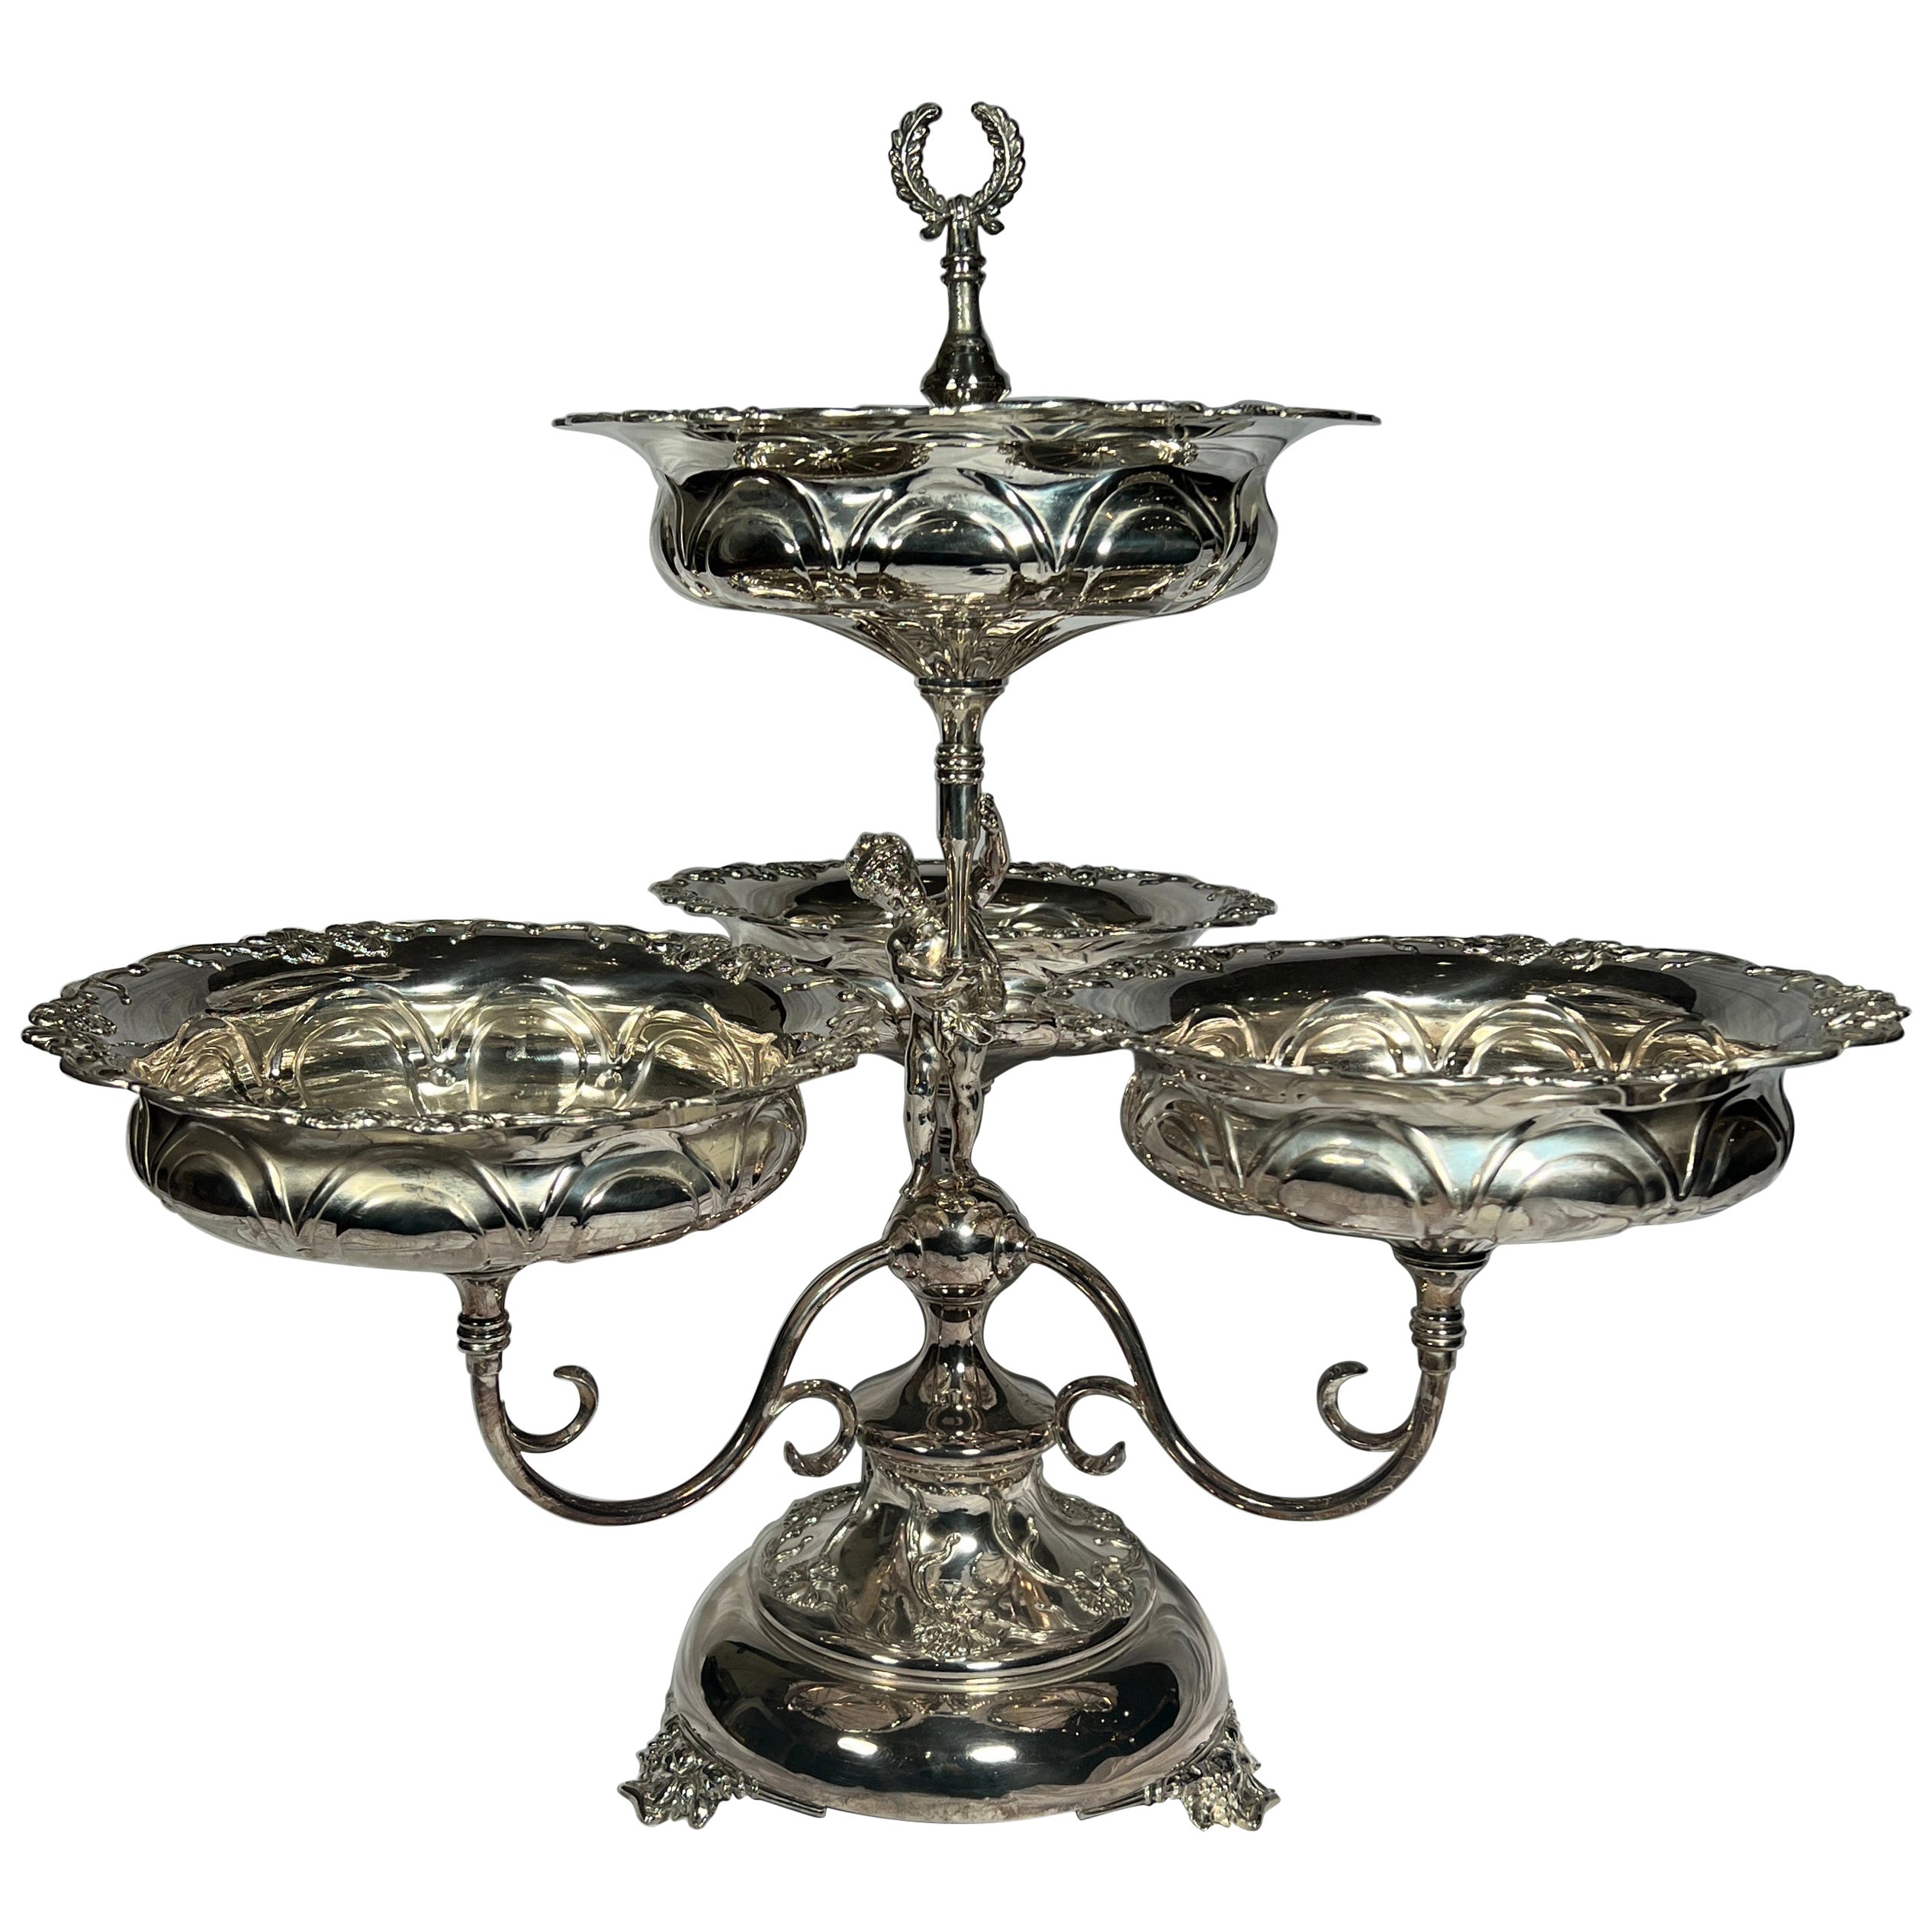 English Silver Plate Epergne circa 1950s